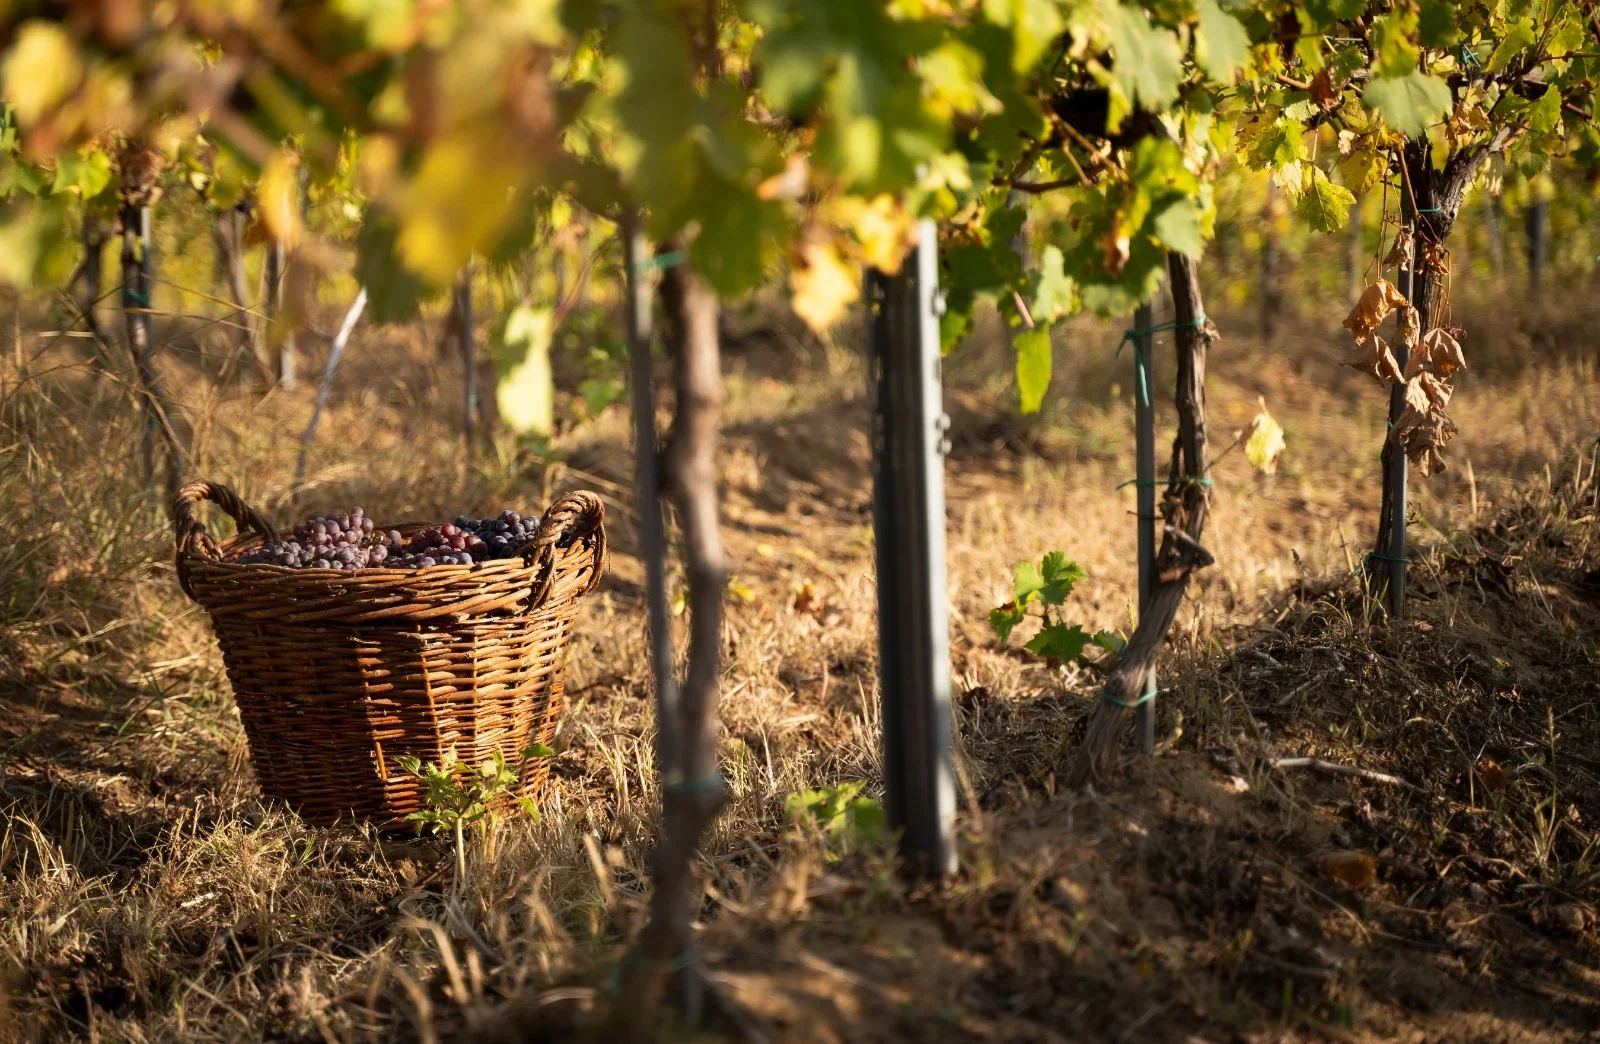 Top 10 wine producing countries in the world